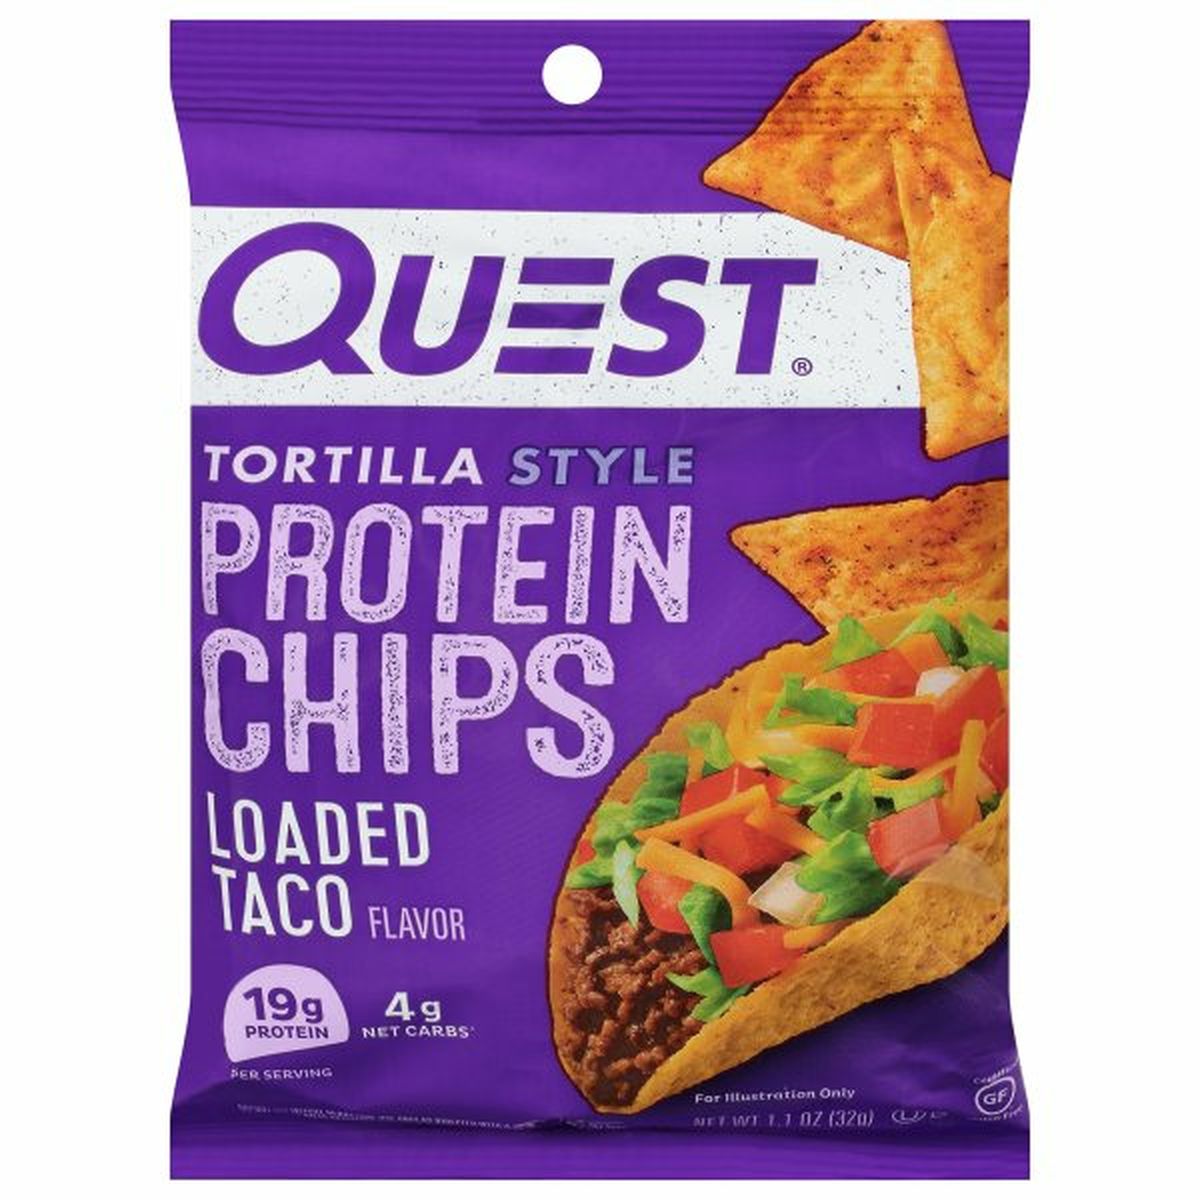 Calories in Quest Protein Chips, Loaded Taco Flavor, Tortilla Style